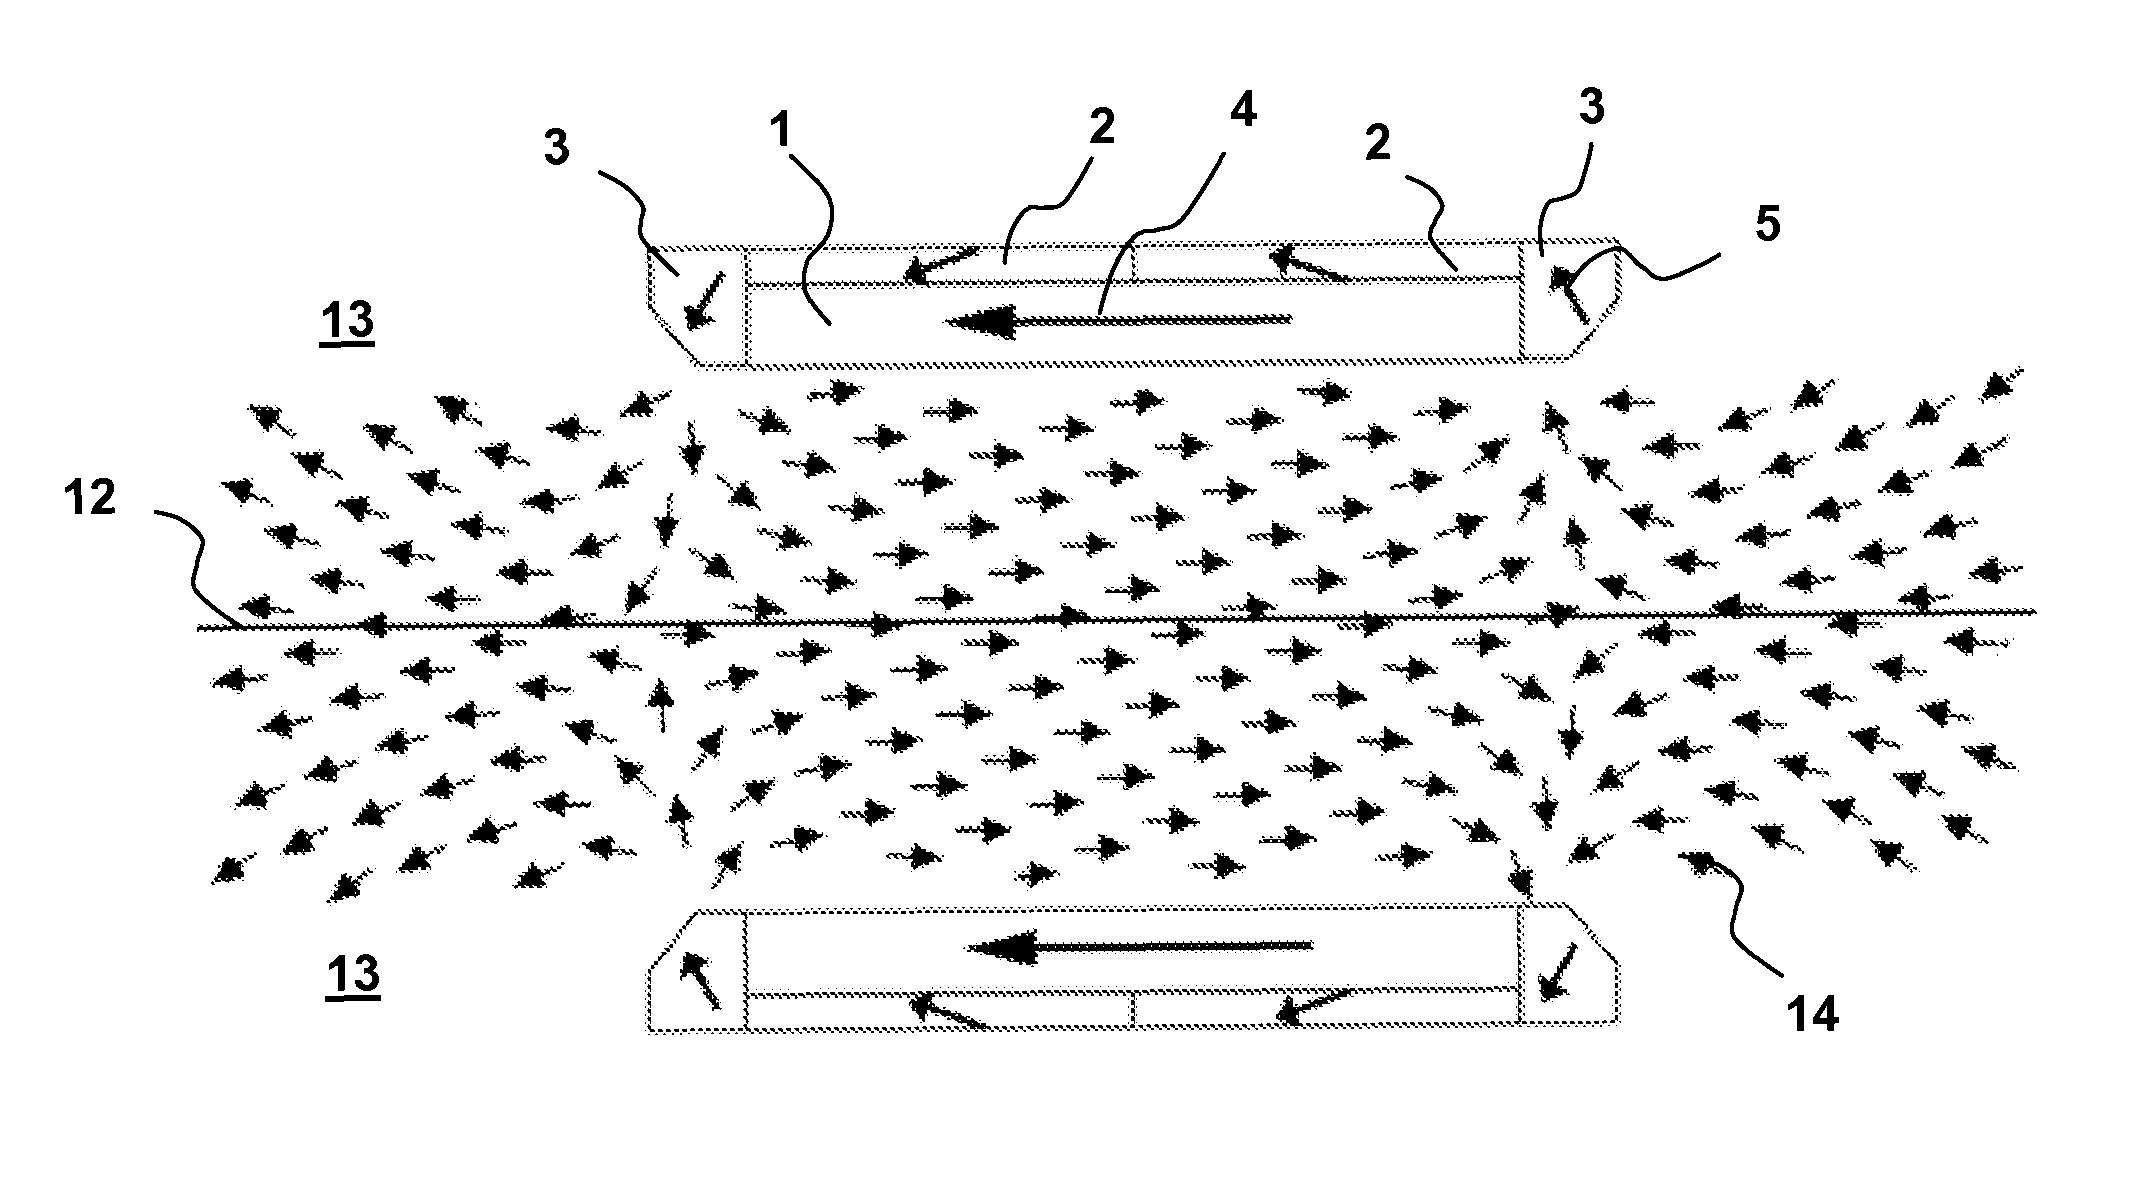 Permanent magnet structure for producing a uniform axial magnetic field